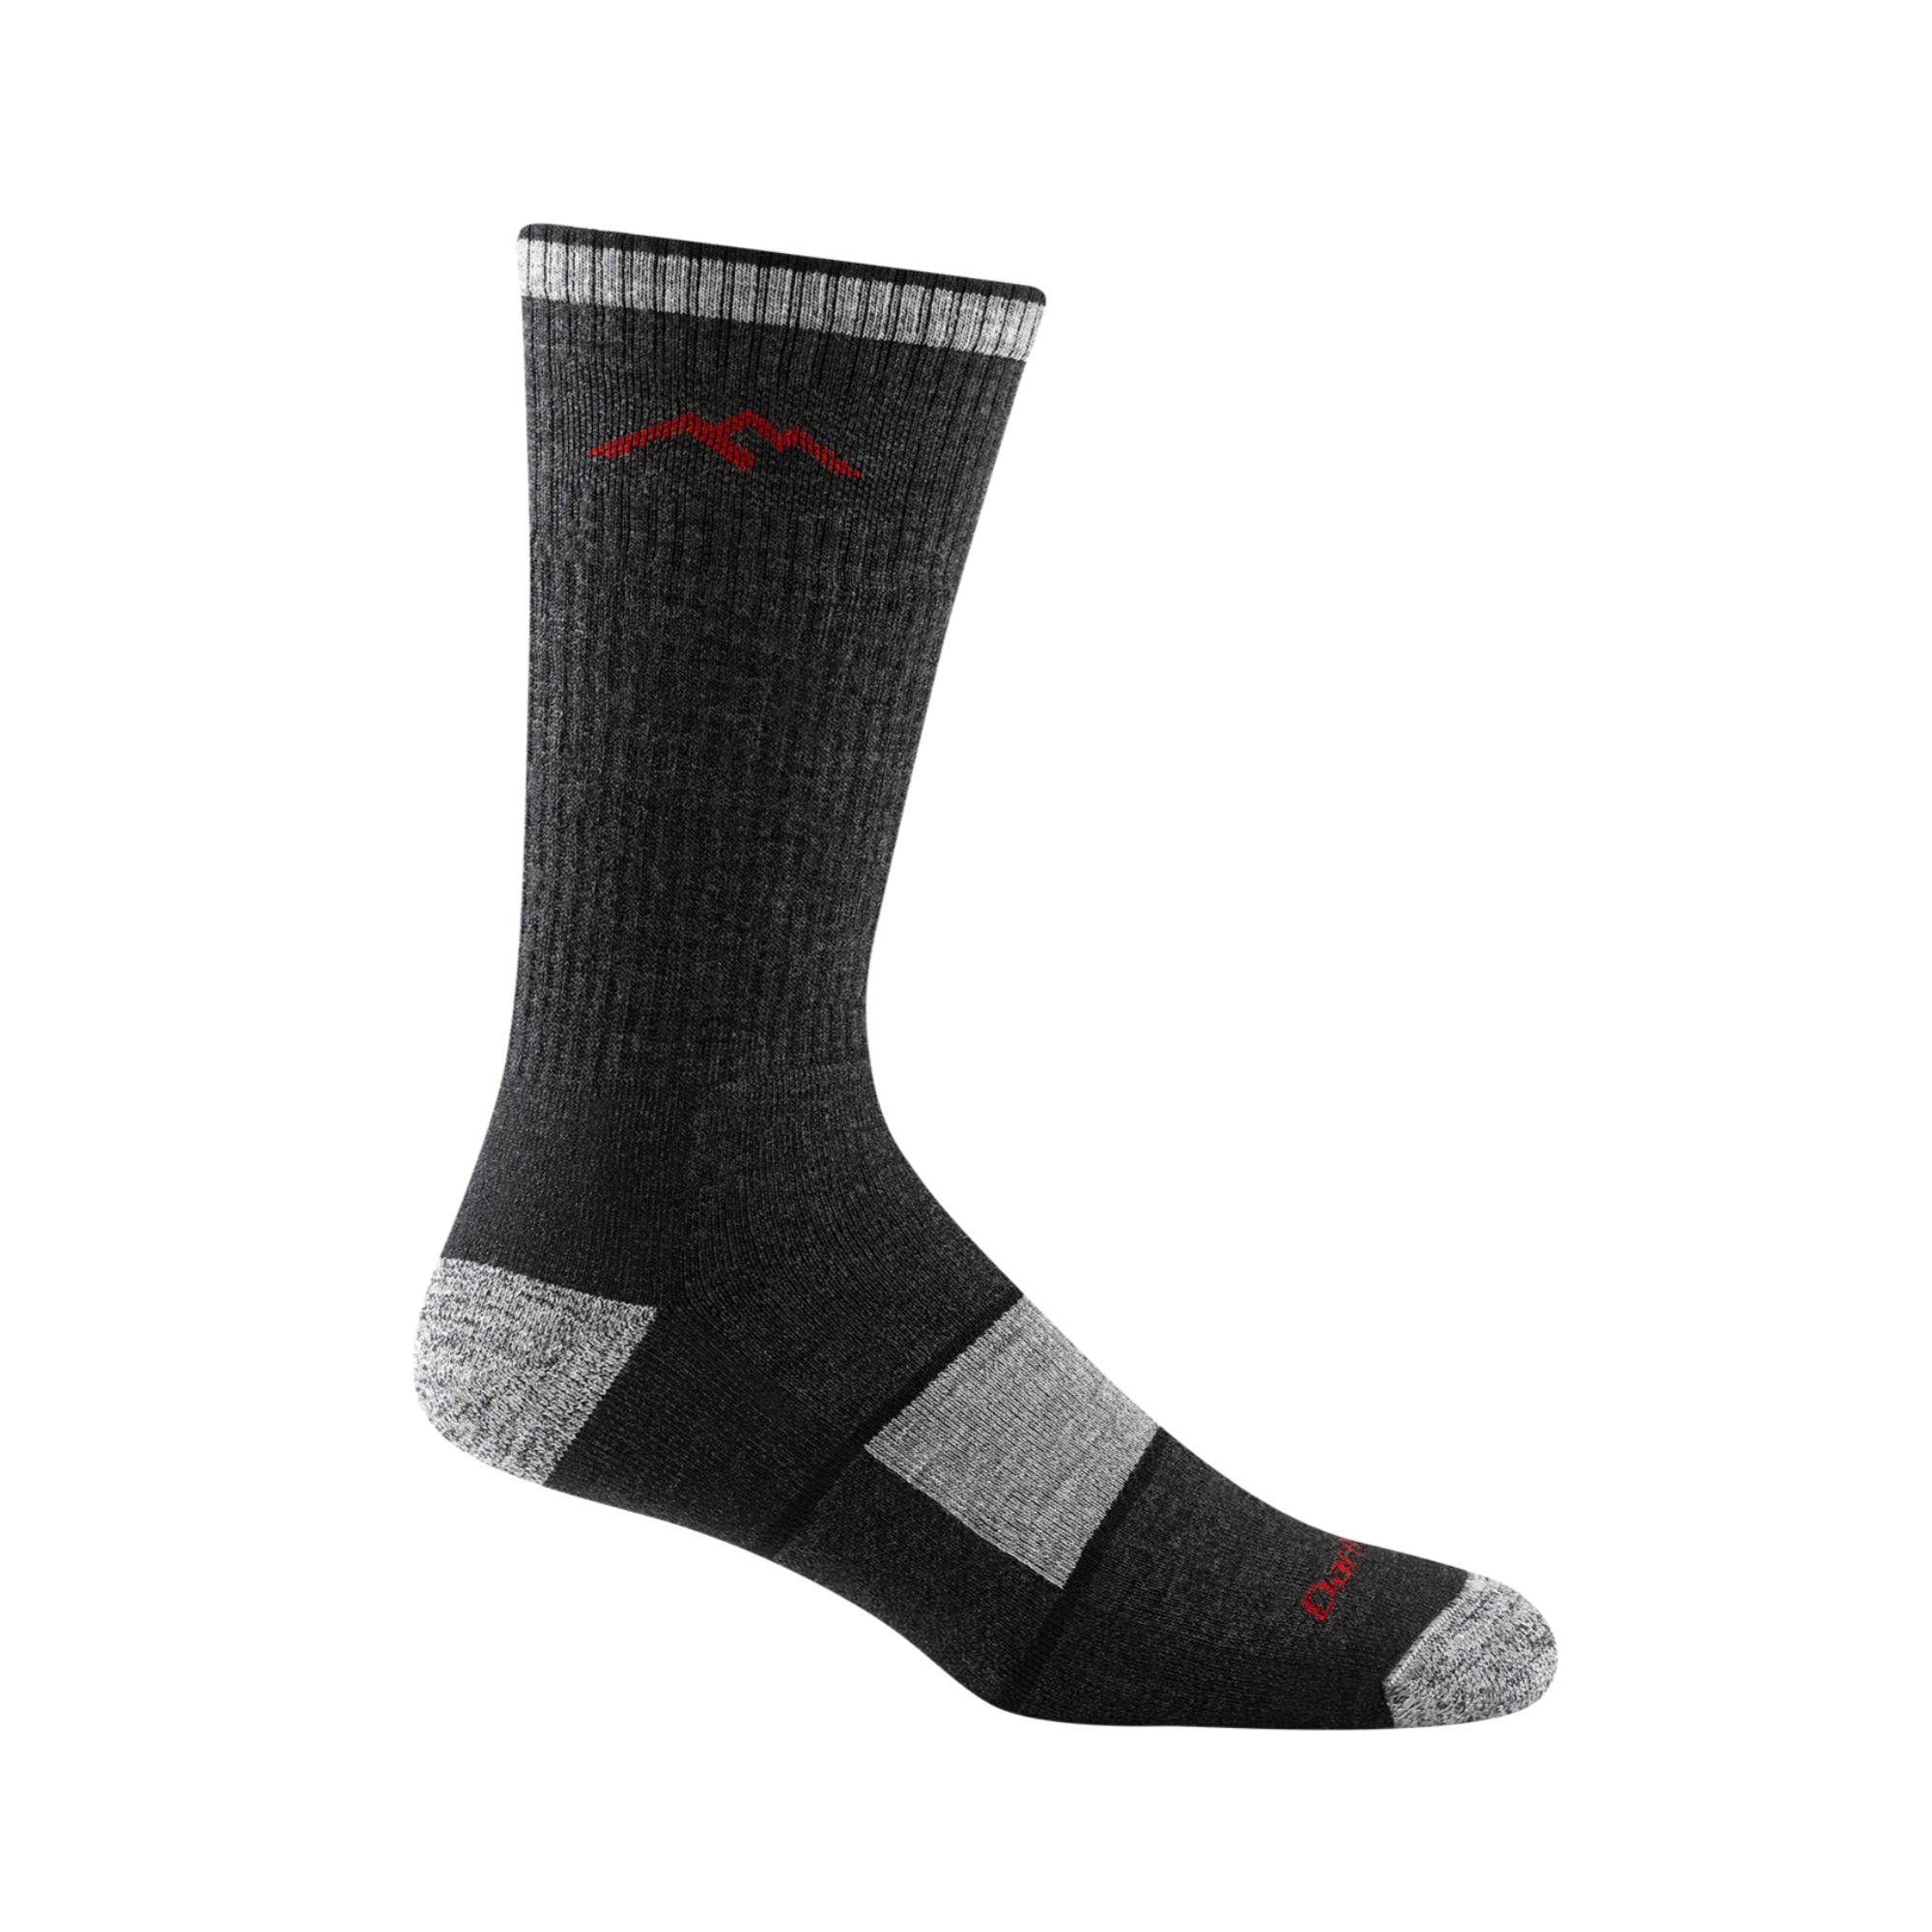 1405 men's hiking boot sock in color black with light gray toe/heel accents and forefoot color block